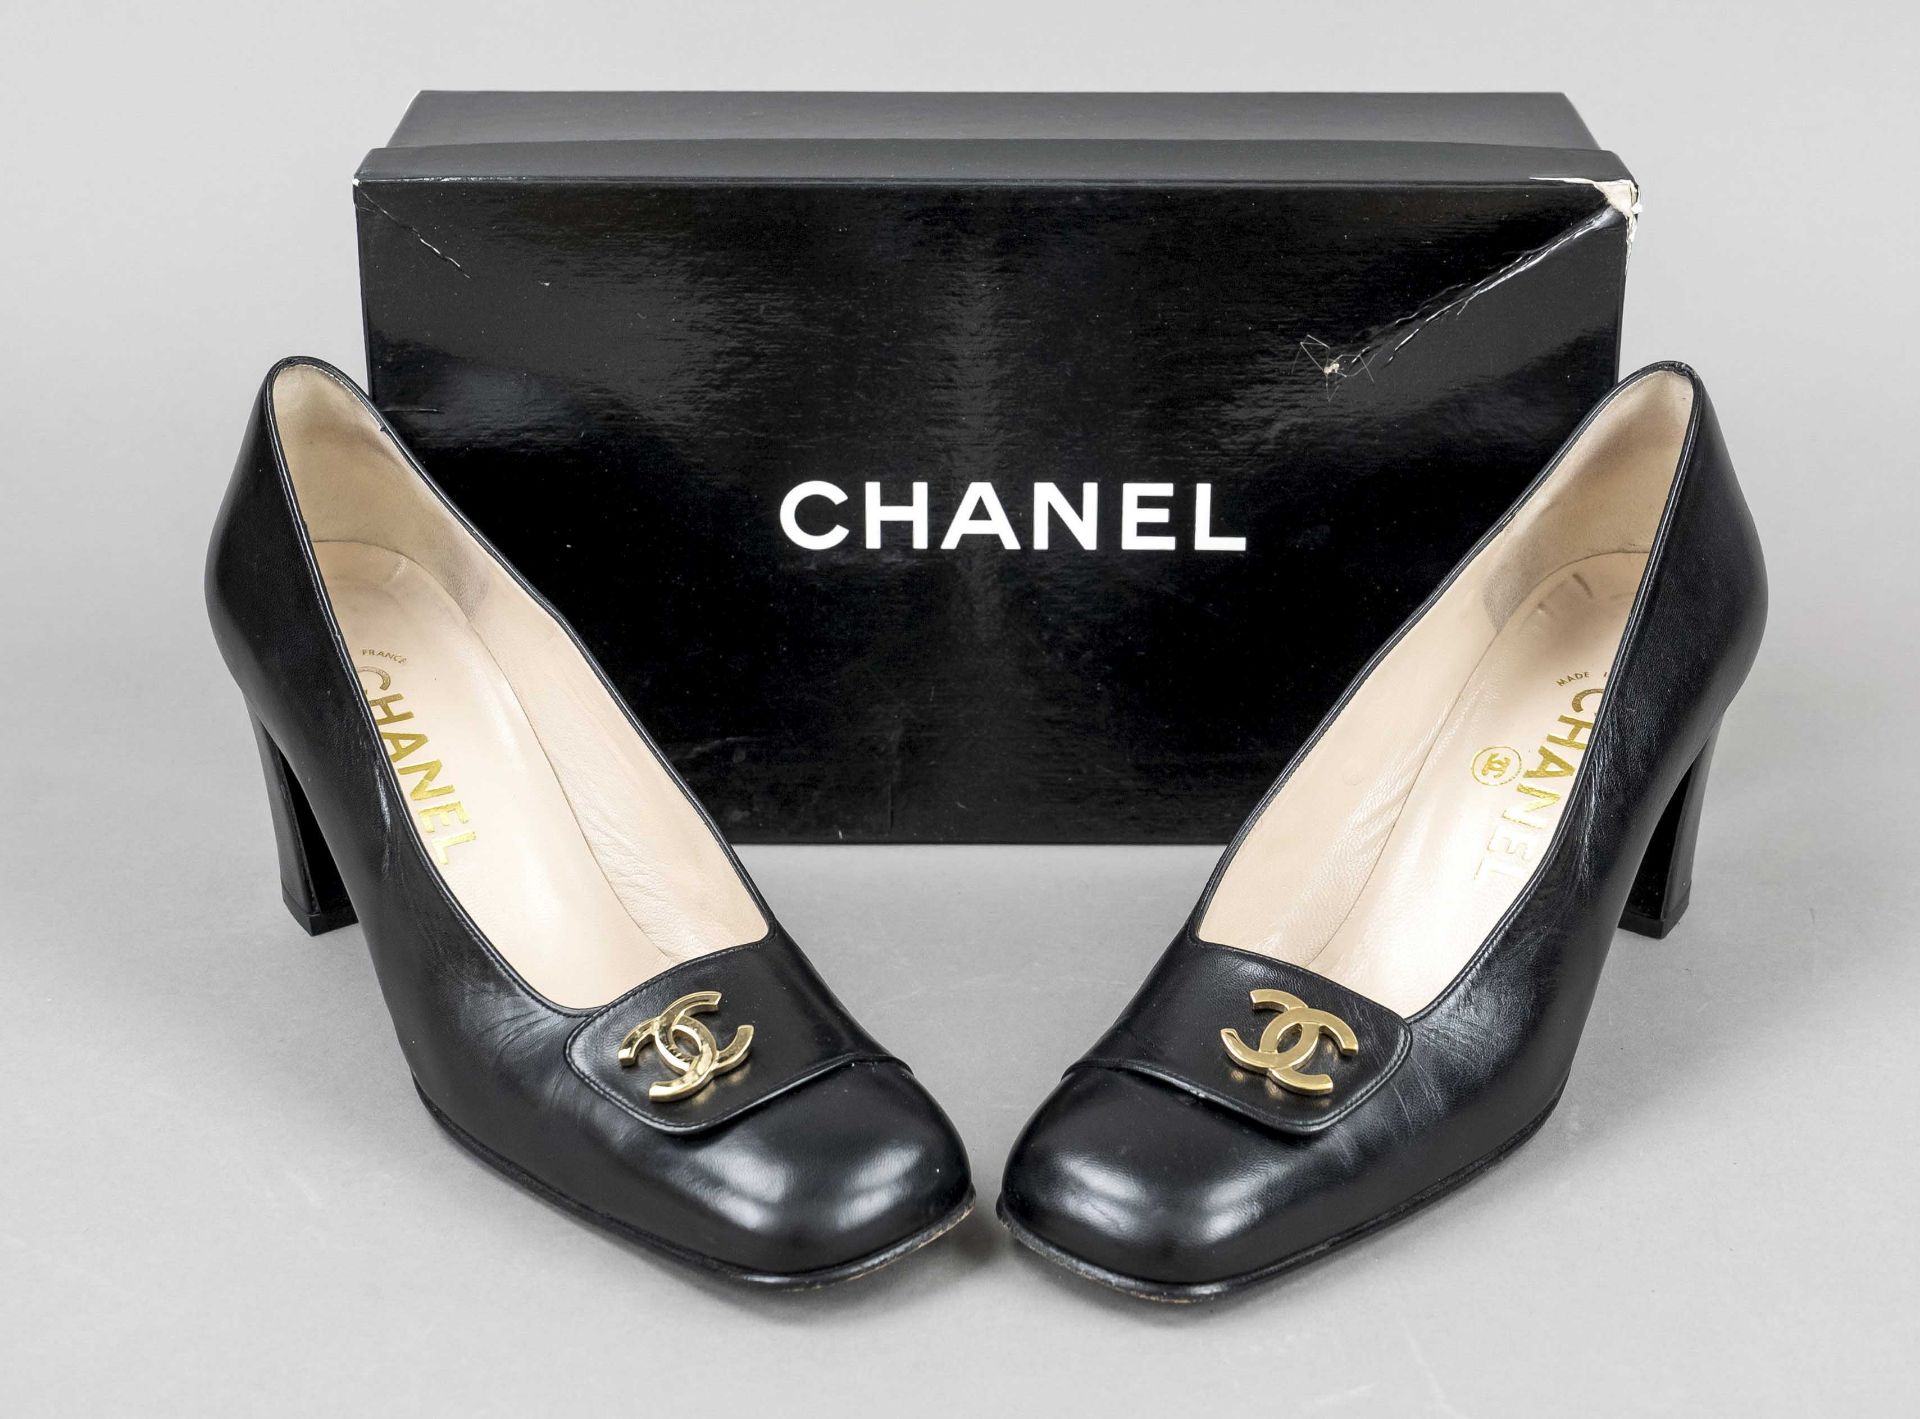 Chanel, ladies vintage business low shoe with wide block heel, black smooth leather, small side flap